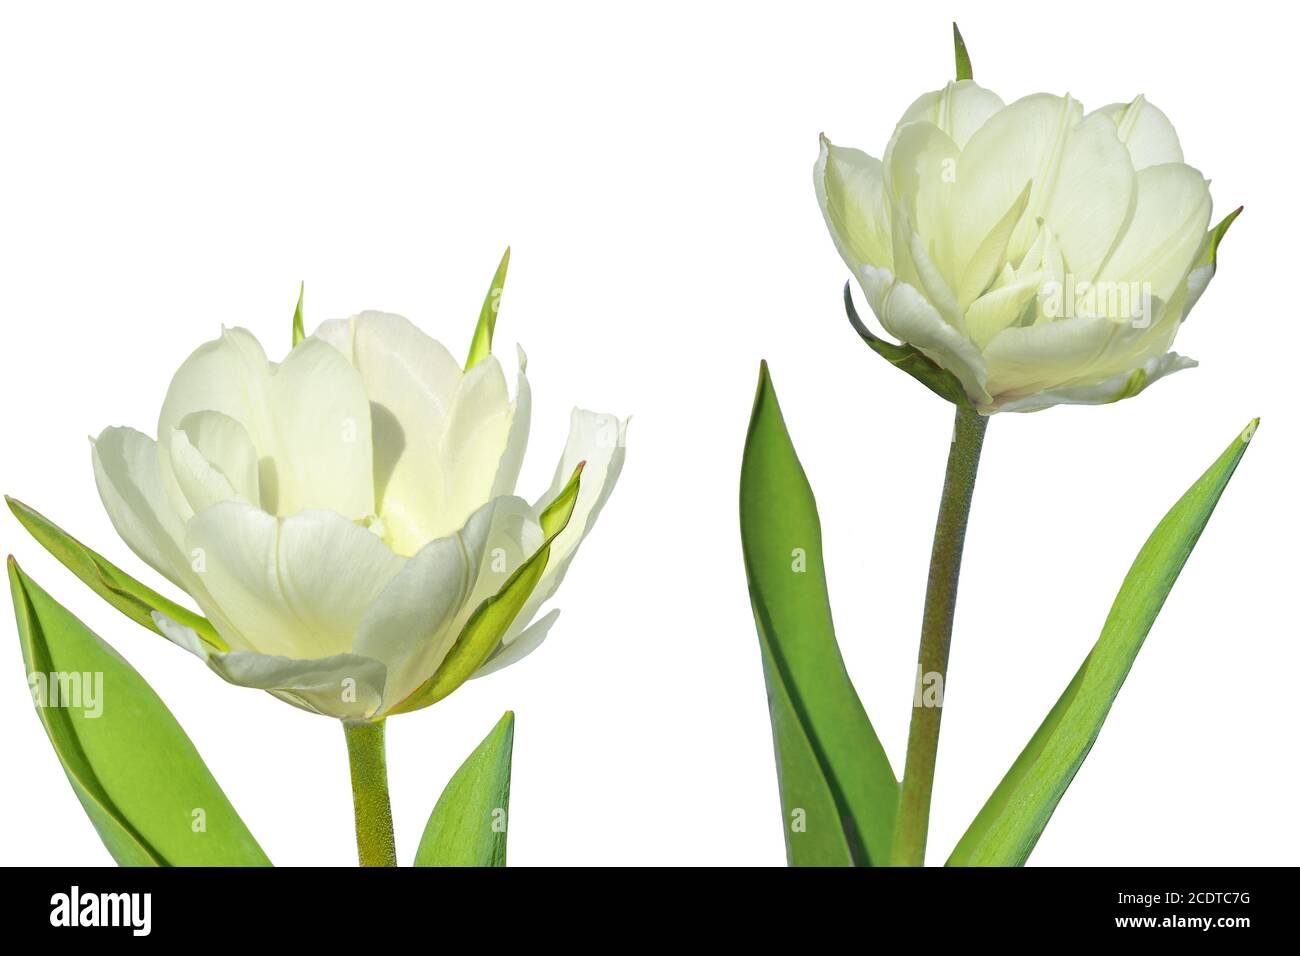 Two terry white tulips close up isolated on white background Stock Photo